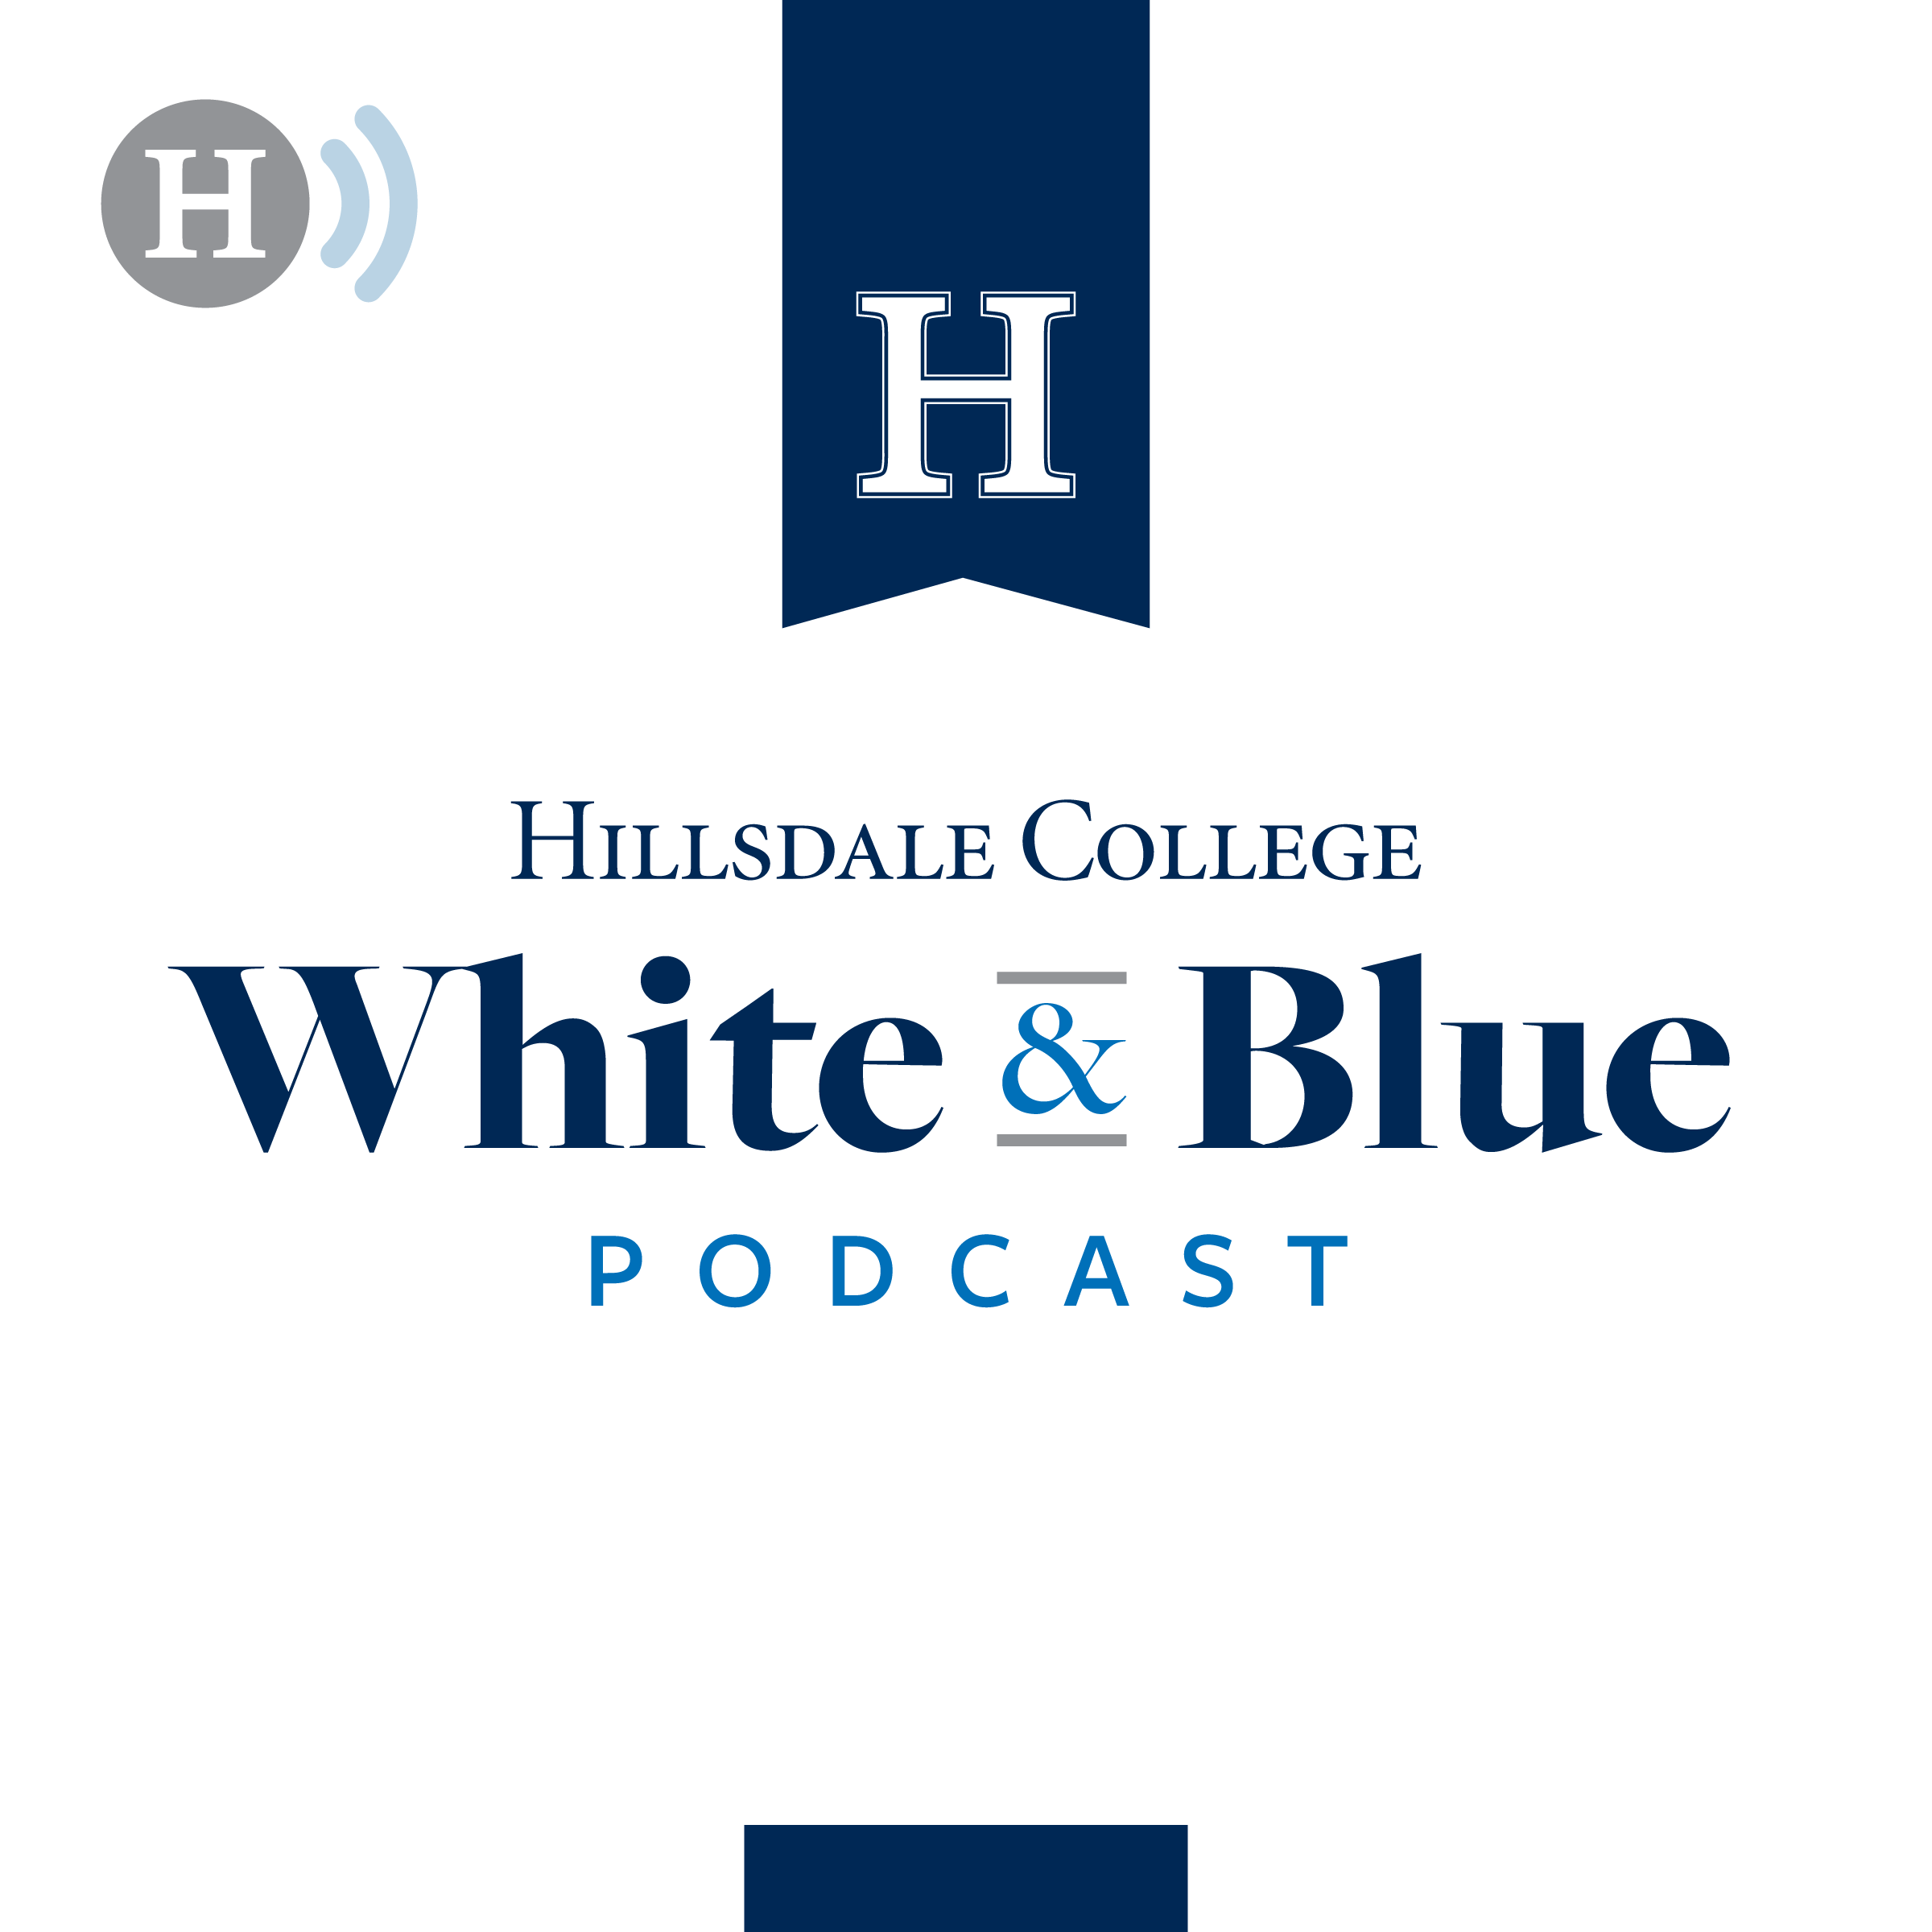 The White and Blue Podcast